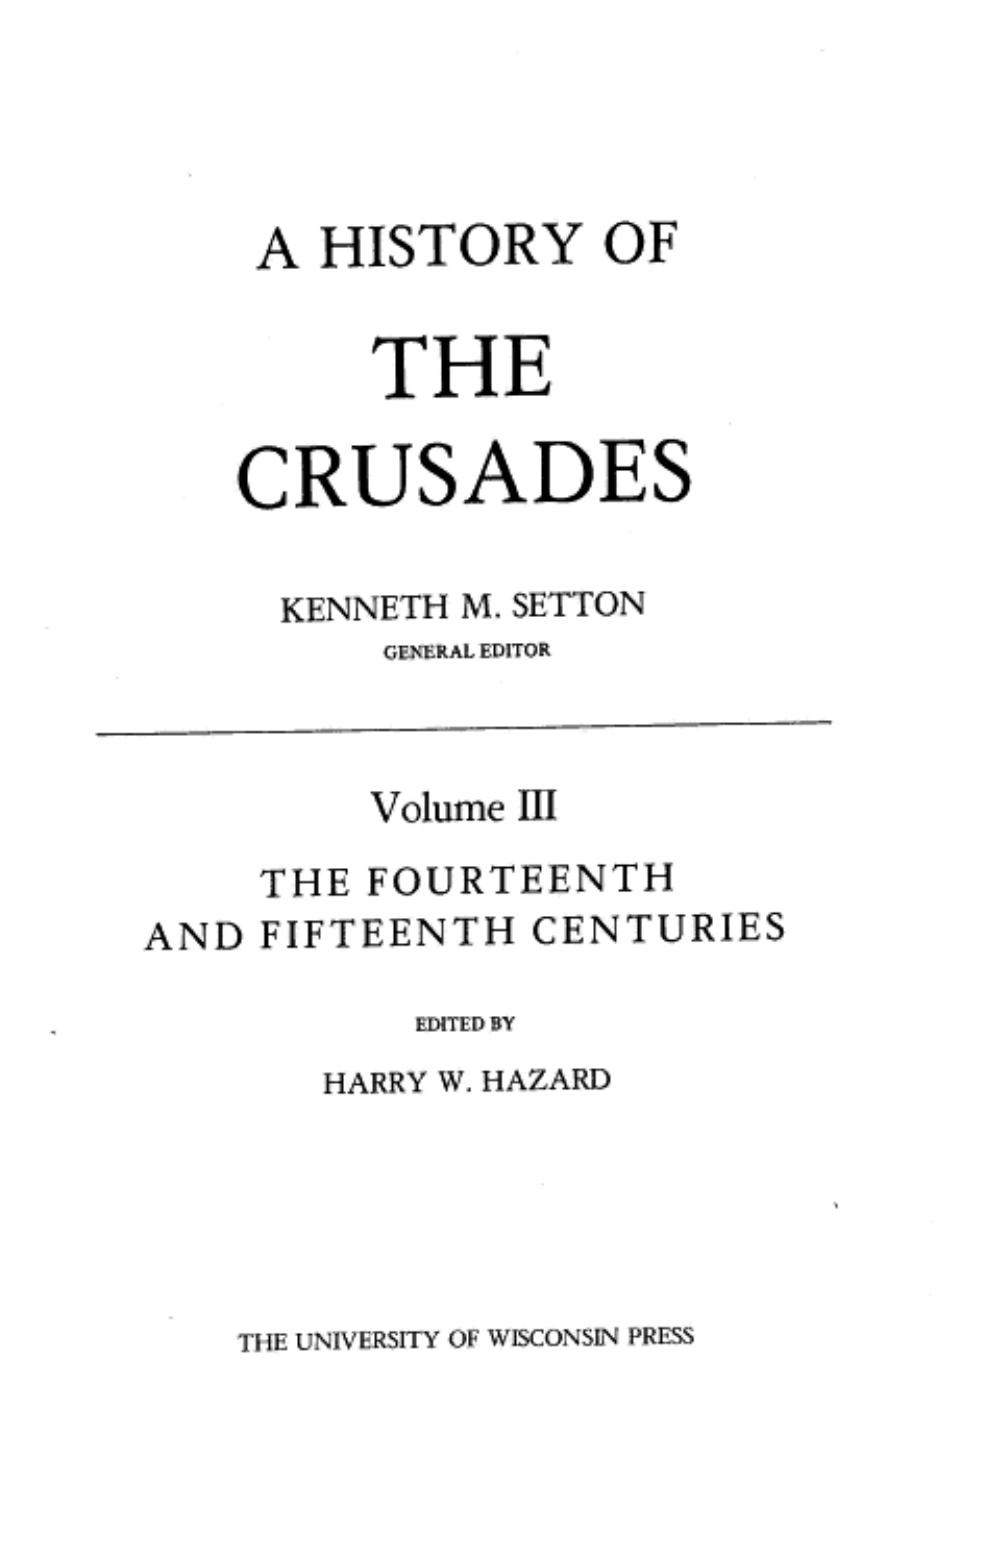 A History of the Crusades, Vol. III; The 14th and 15th Centuries